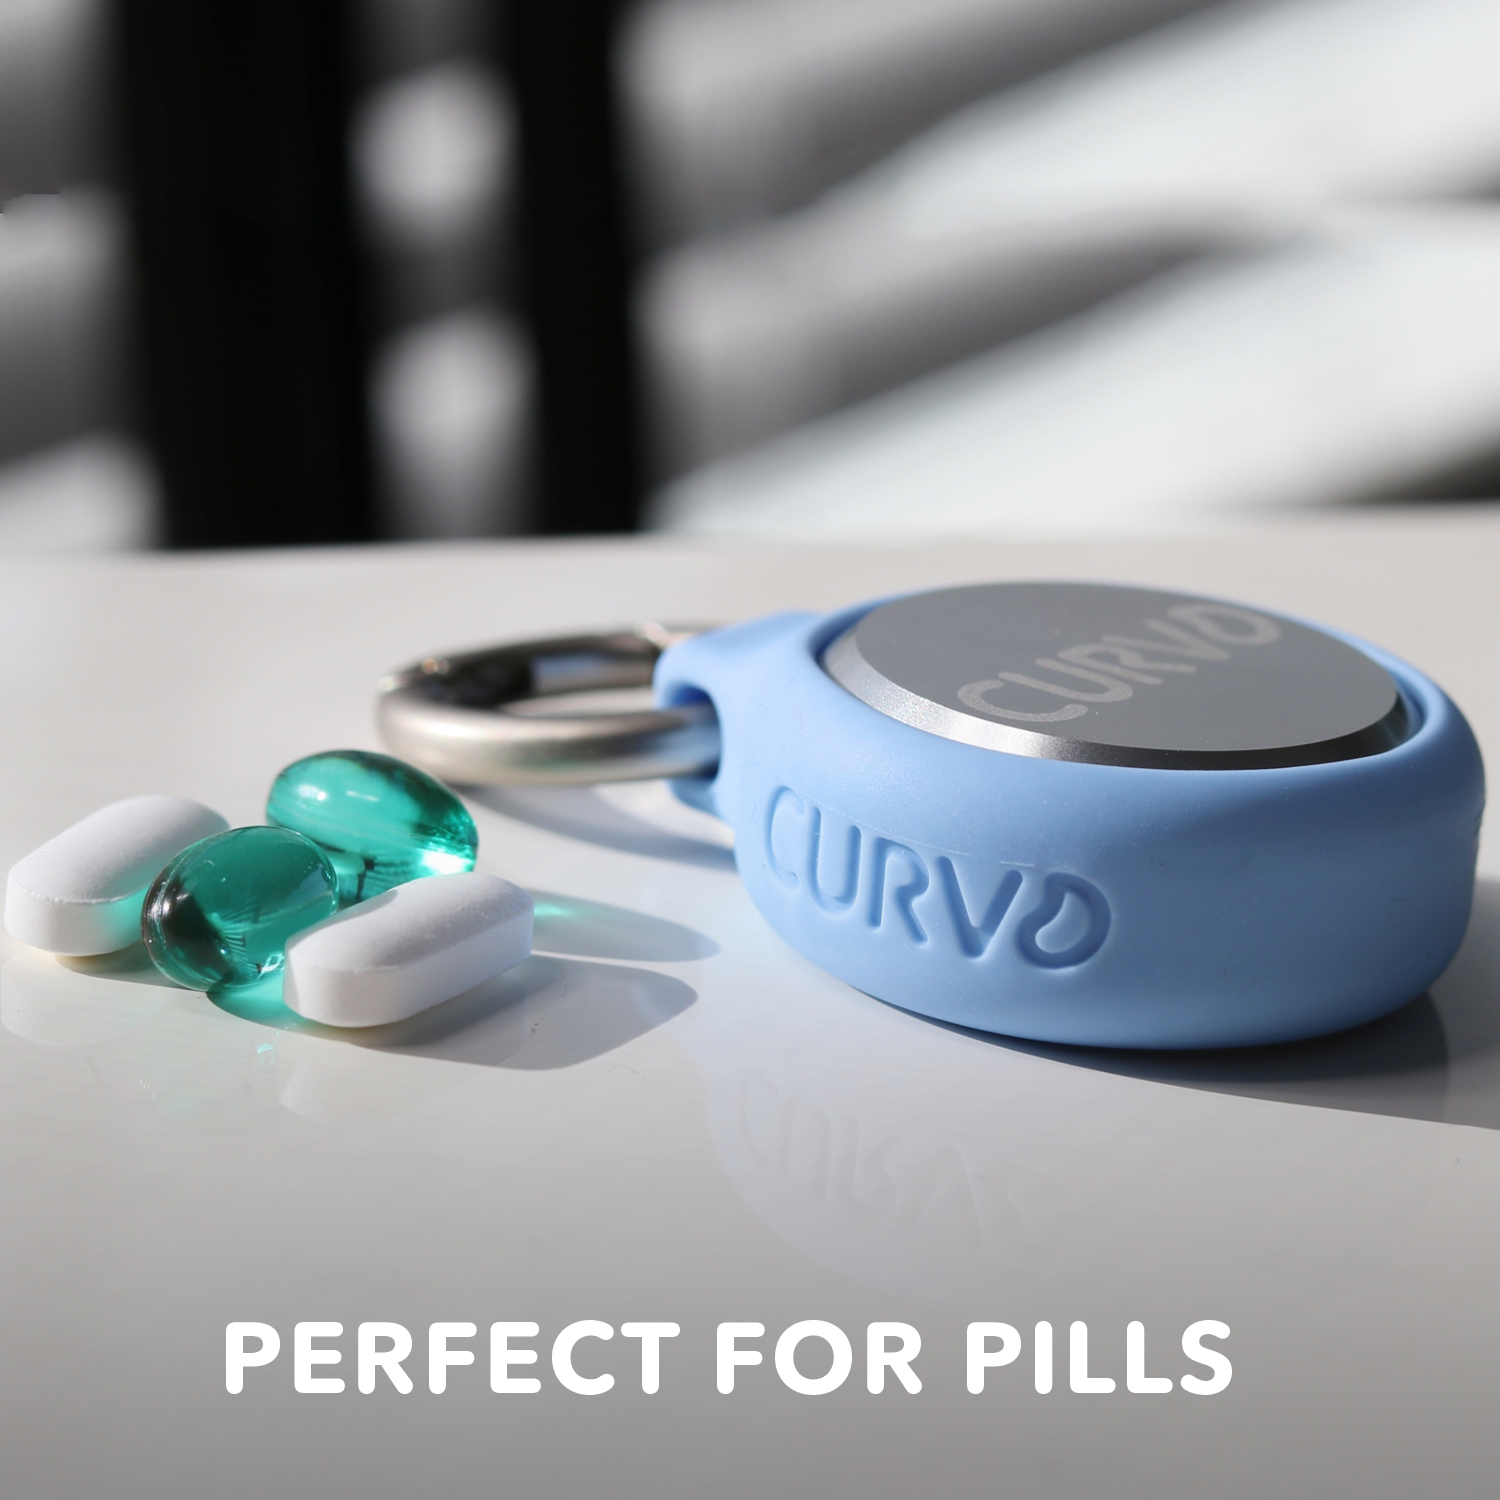 A Premium Carrying Case Plus Clip by CURVD Earplugs is shown on a white surface. Next to it are two green translucent capsules and two white tablets. The text "PERFECT FOR PILLS" is displayed at the bottom of the image, highlighting its use as a premium carrying case perfect for daily medication needs.